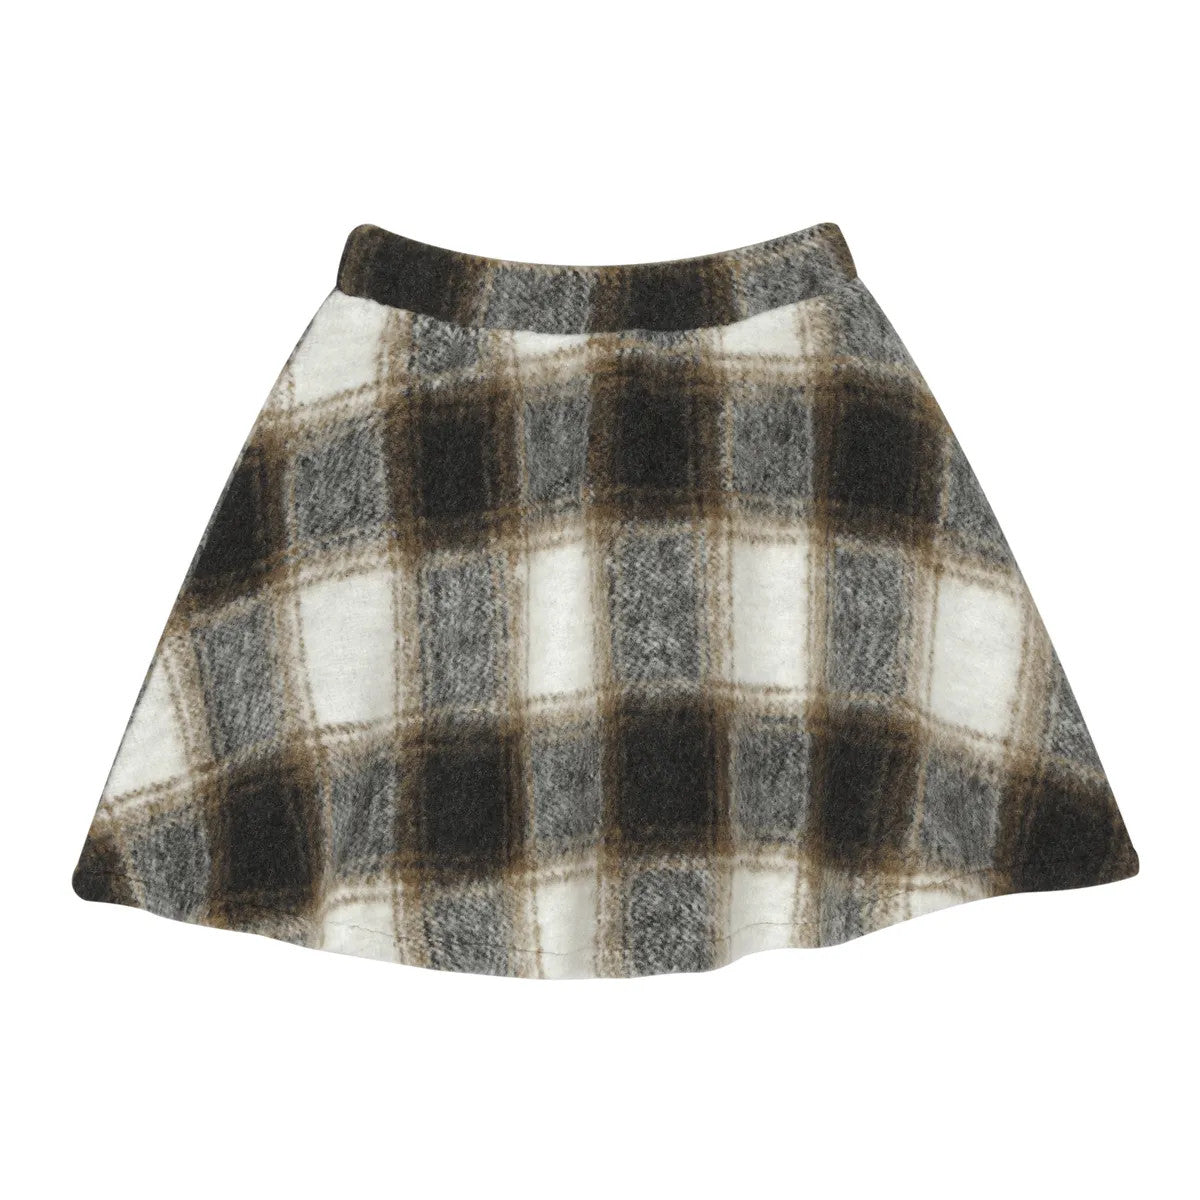 Little Hedonist organic draped knee-high skirt in thick Flanel Jacquard